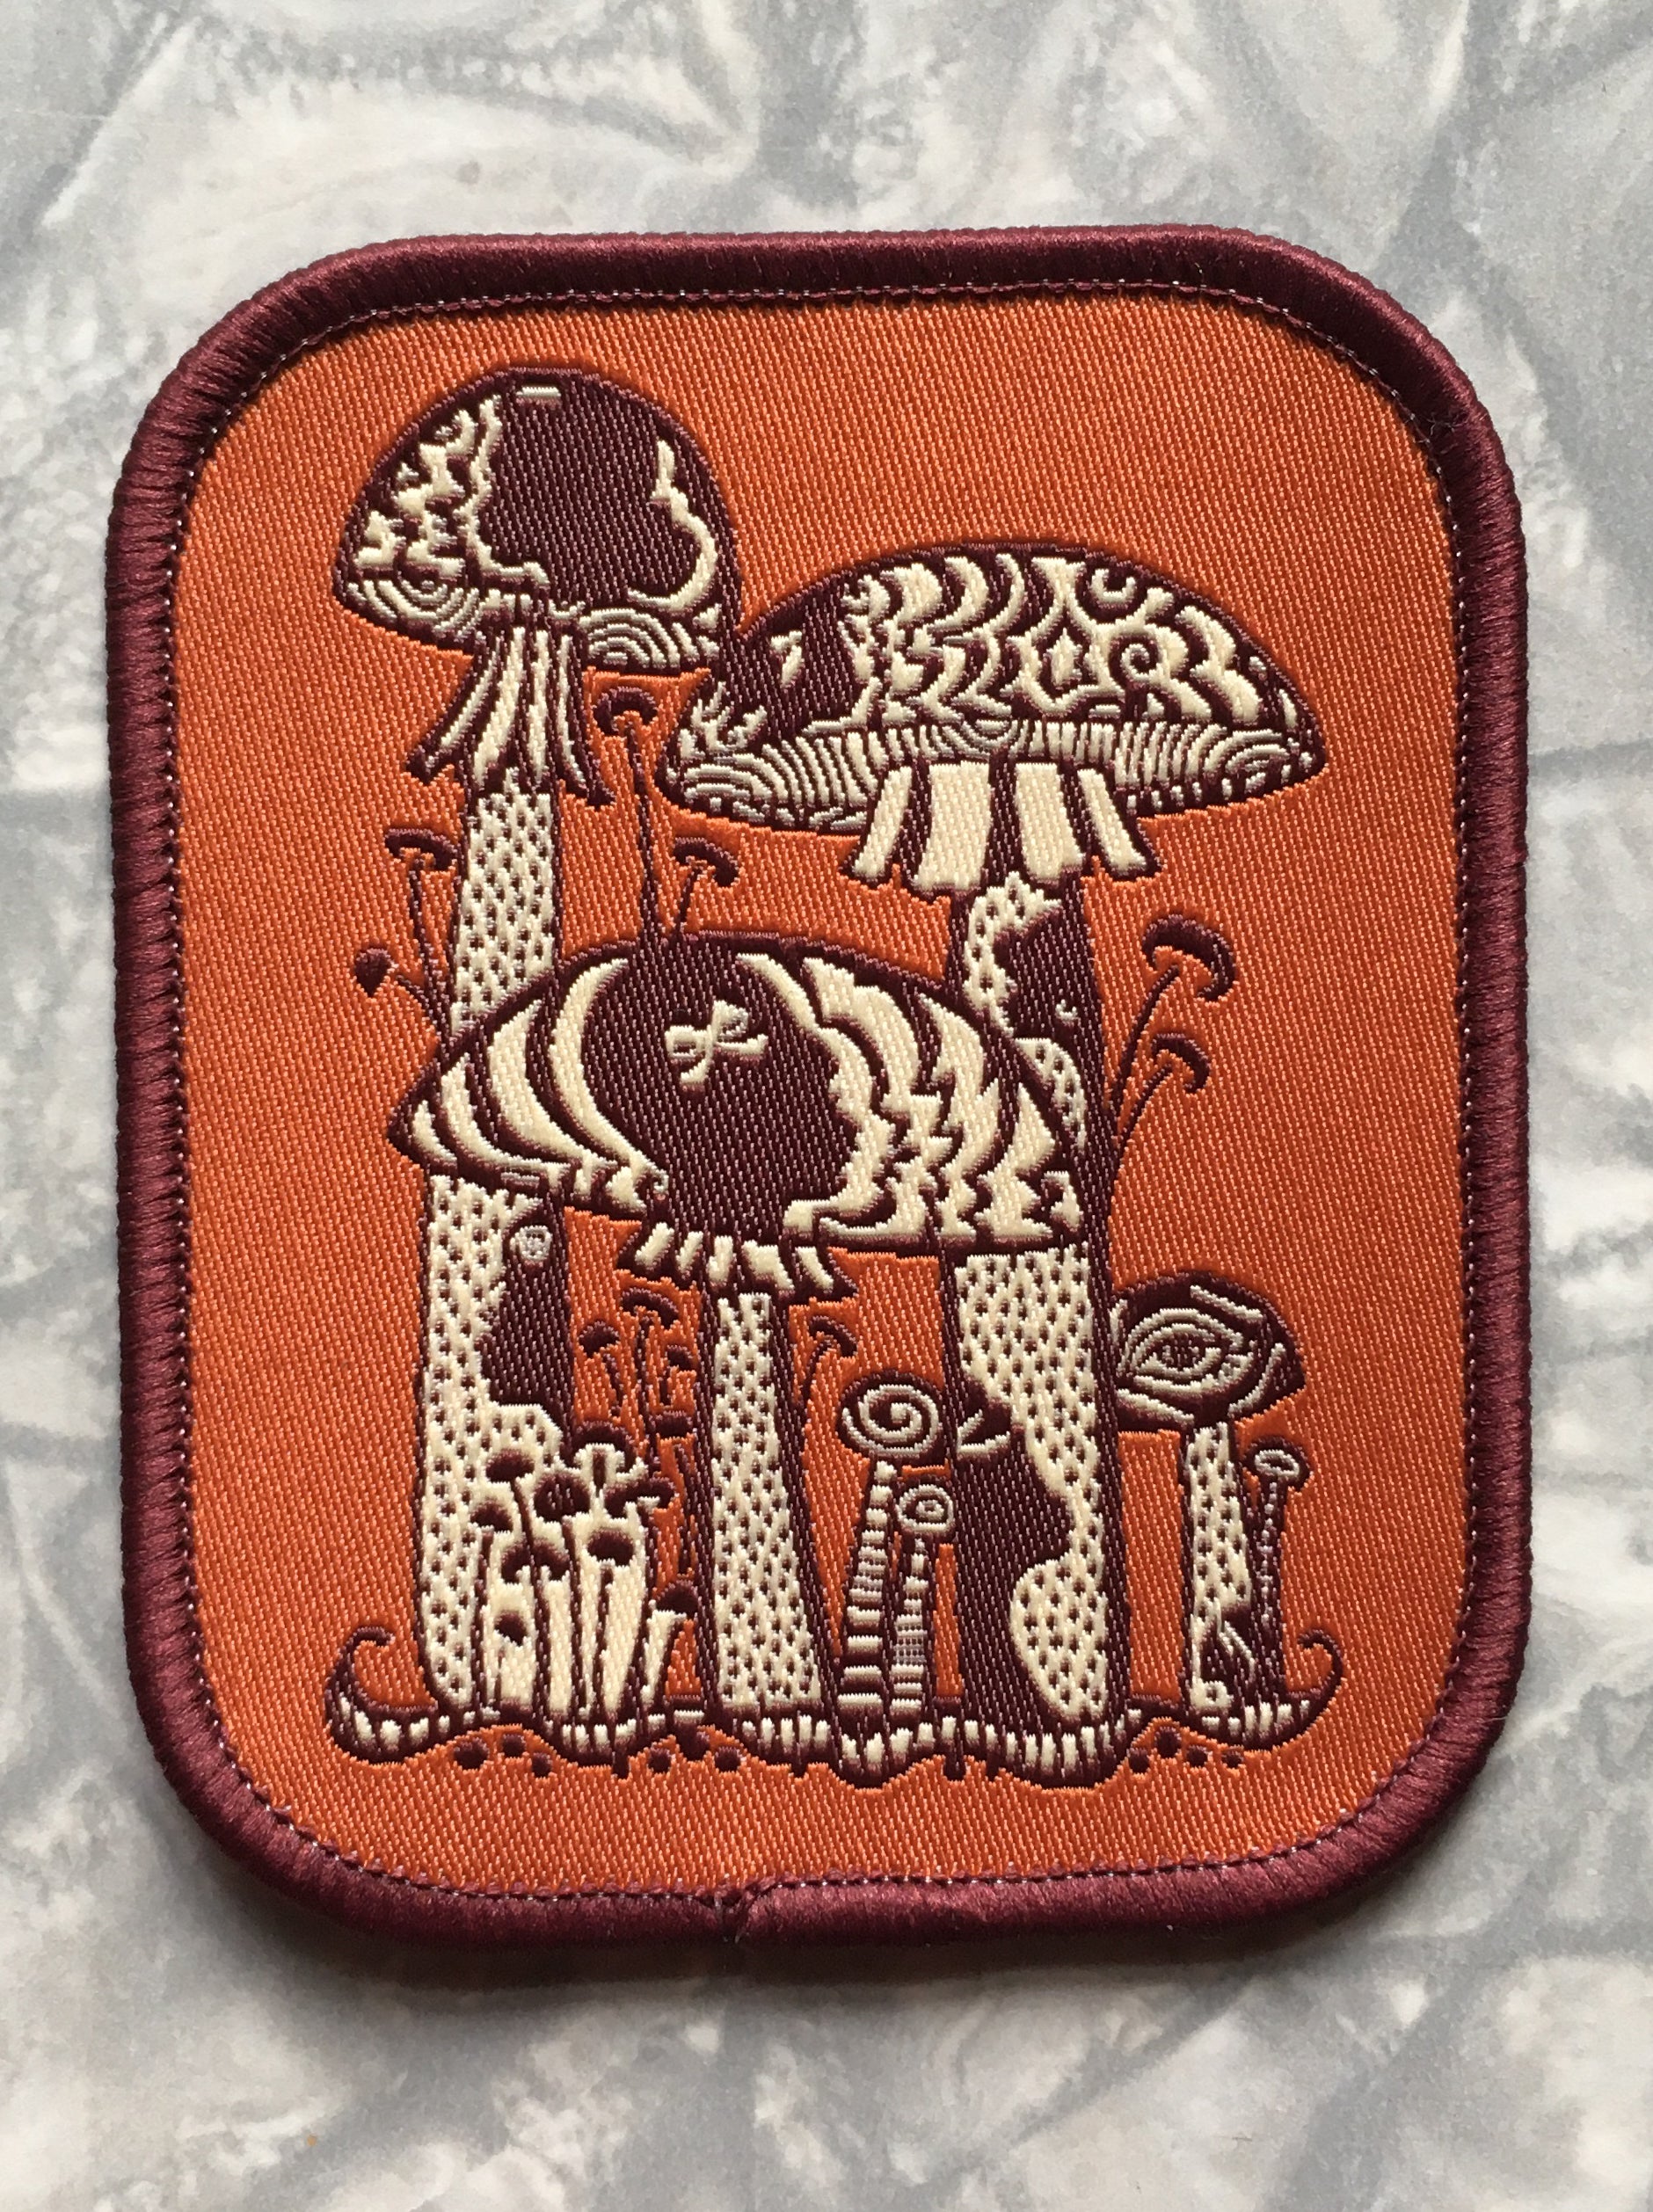 Orange, brown and off white psychedelic mushroom rectangular iron on patch 